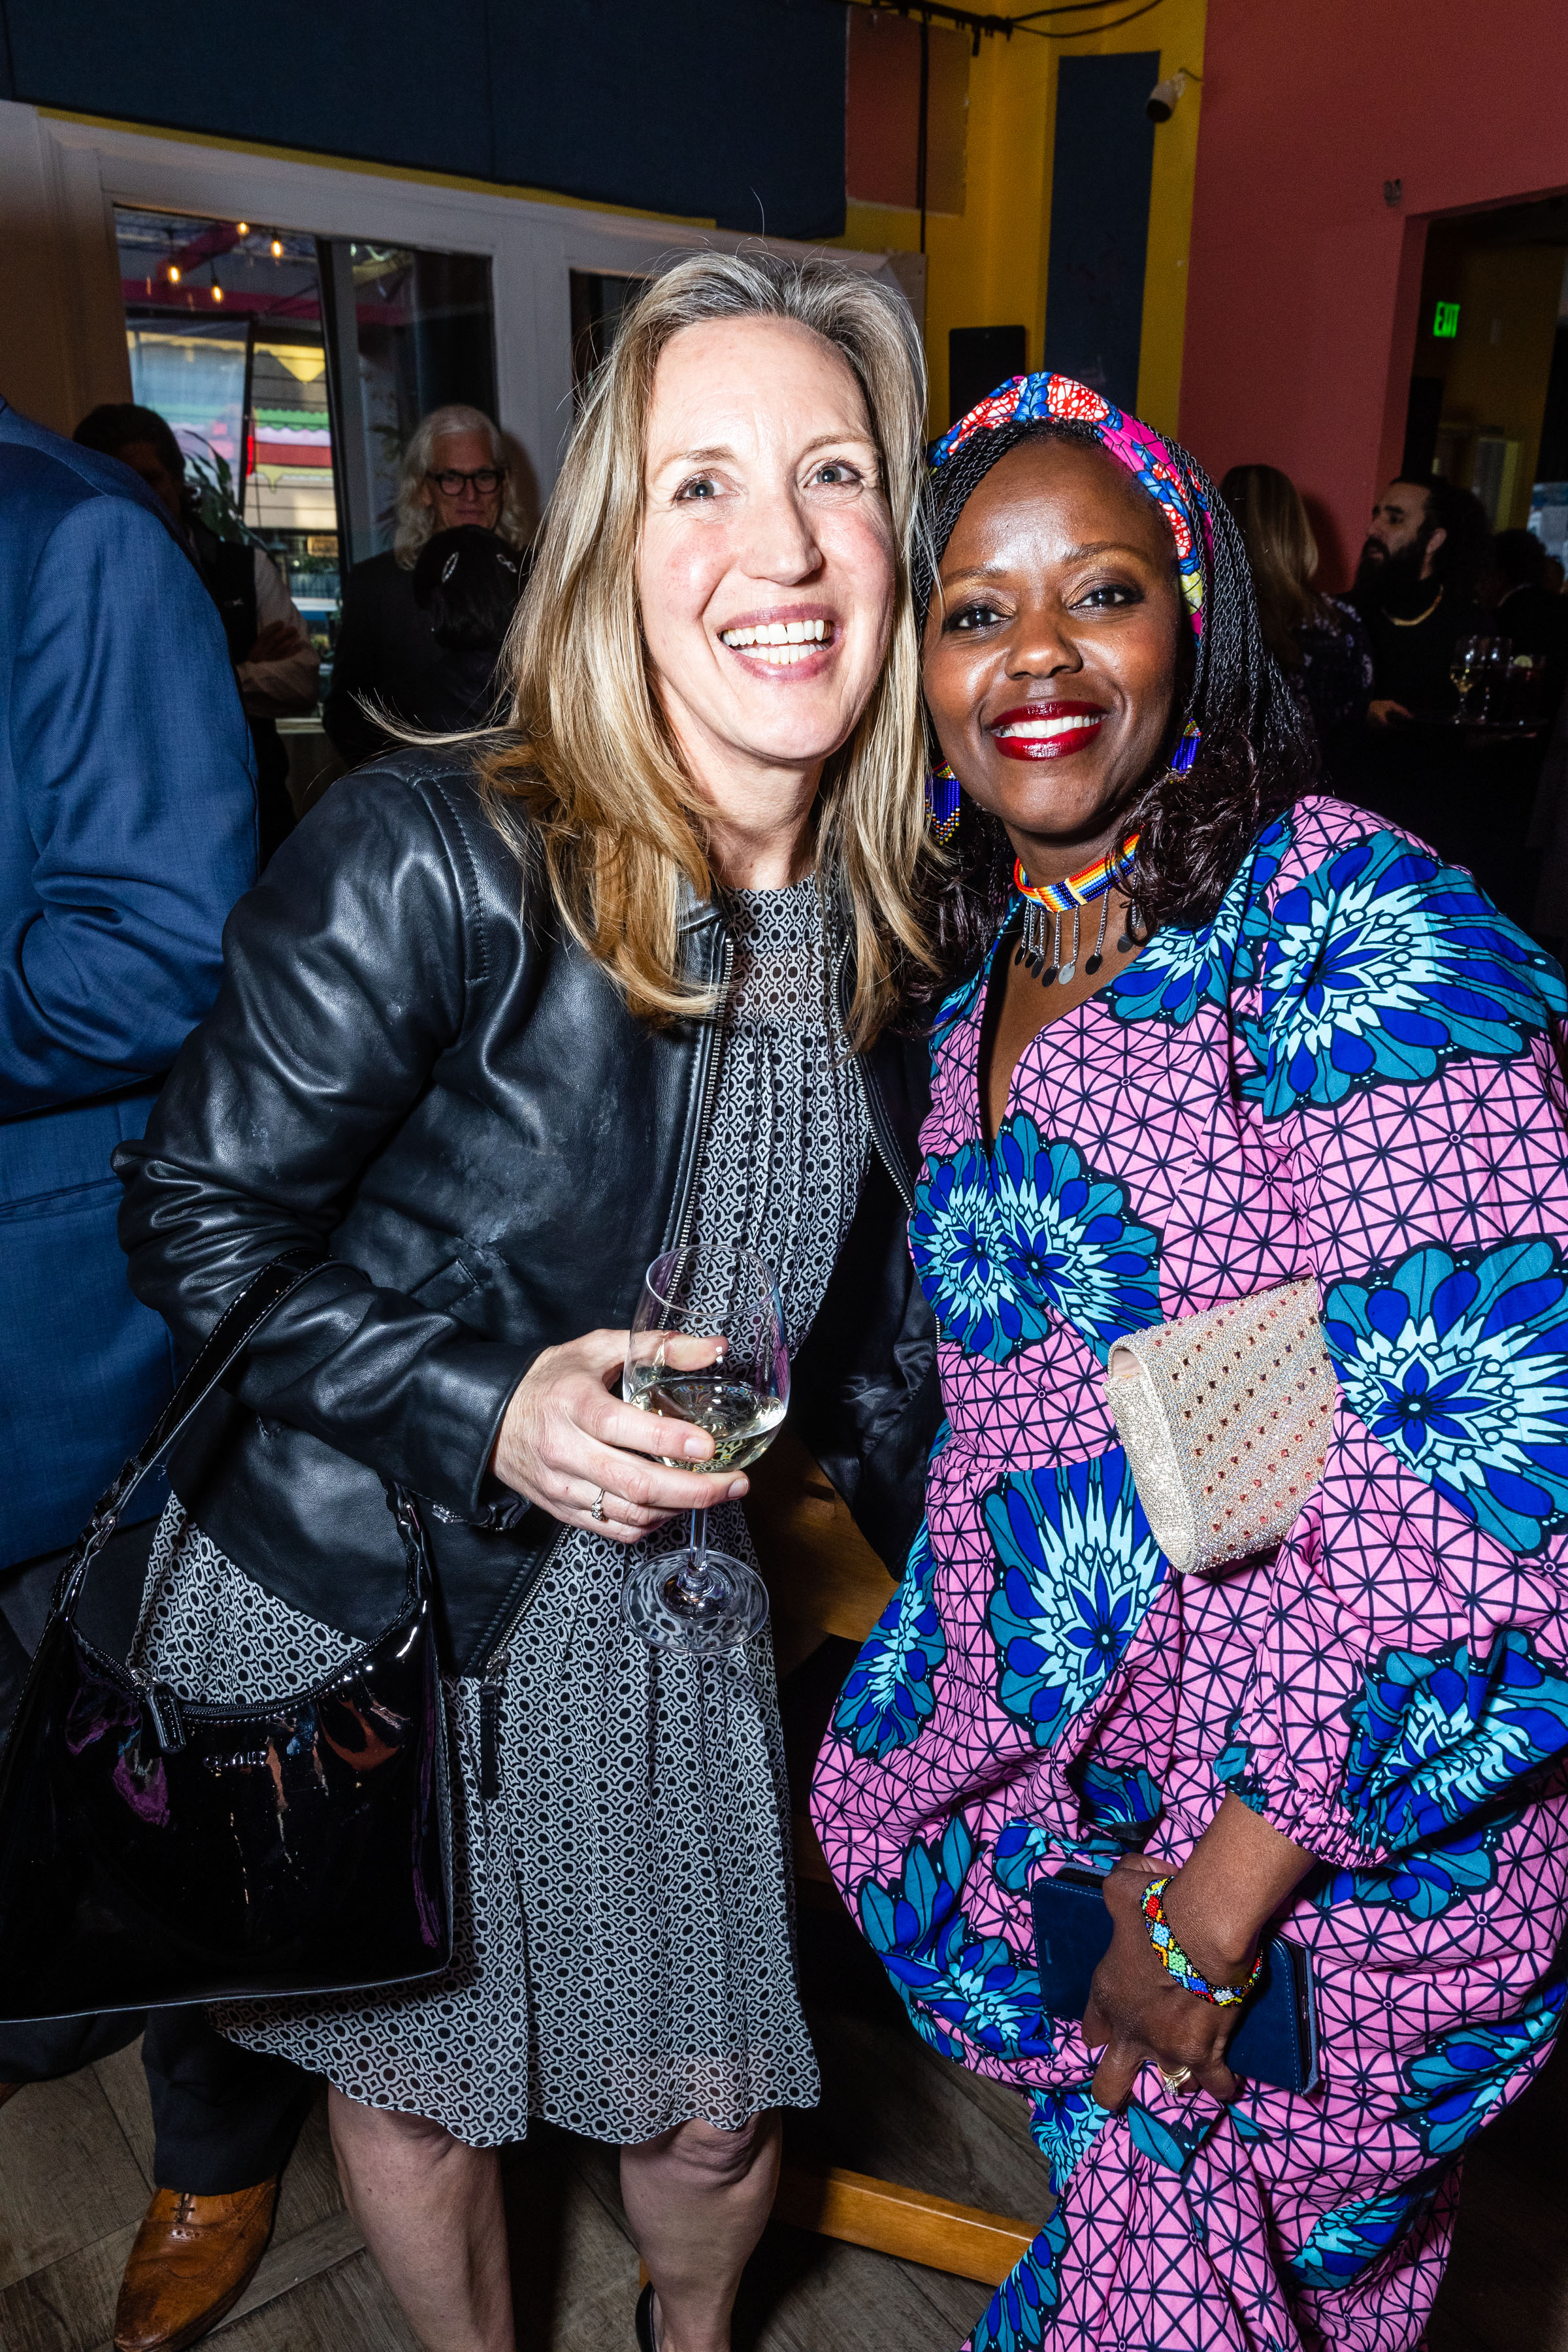 SAN FRANCISCO, CA - March 30 - Flora Mugambi-Mutunga attends Teach With Africa 15th Anniversary Celebrations on March 30th 2023 at Bissap Baobab SF @ 2243 Mission St, SF, CA 94110 US in San Francisco, CA (Photo - Ando Caulfield for Drew Altizer Photography)